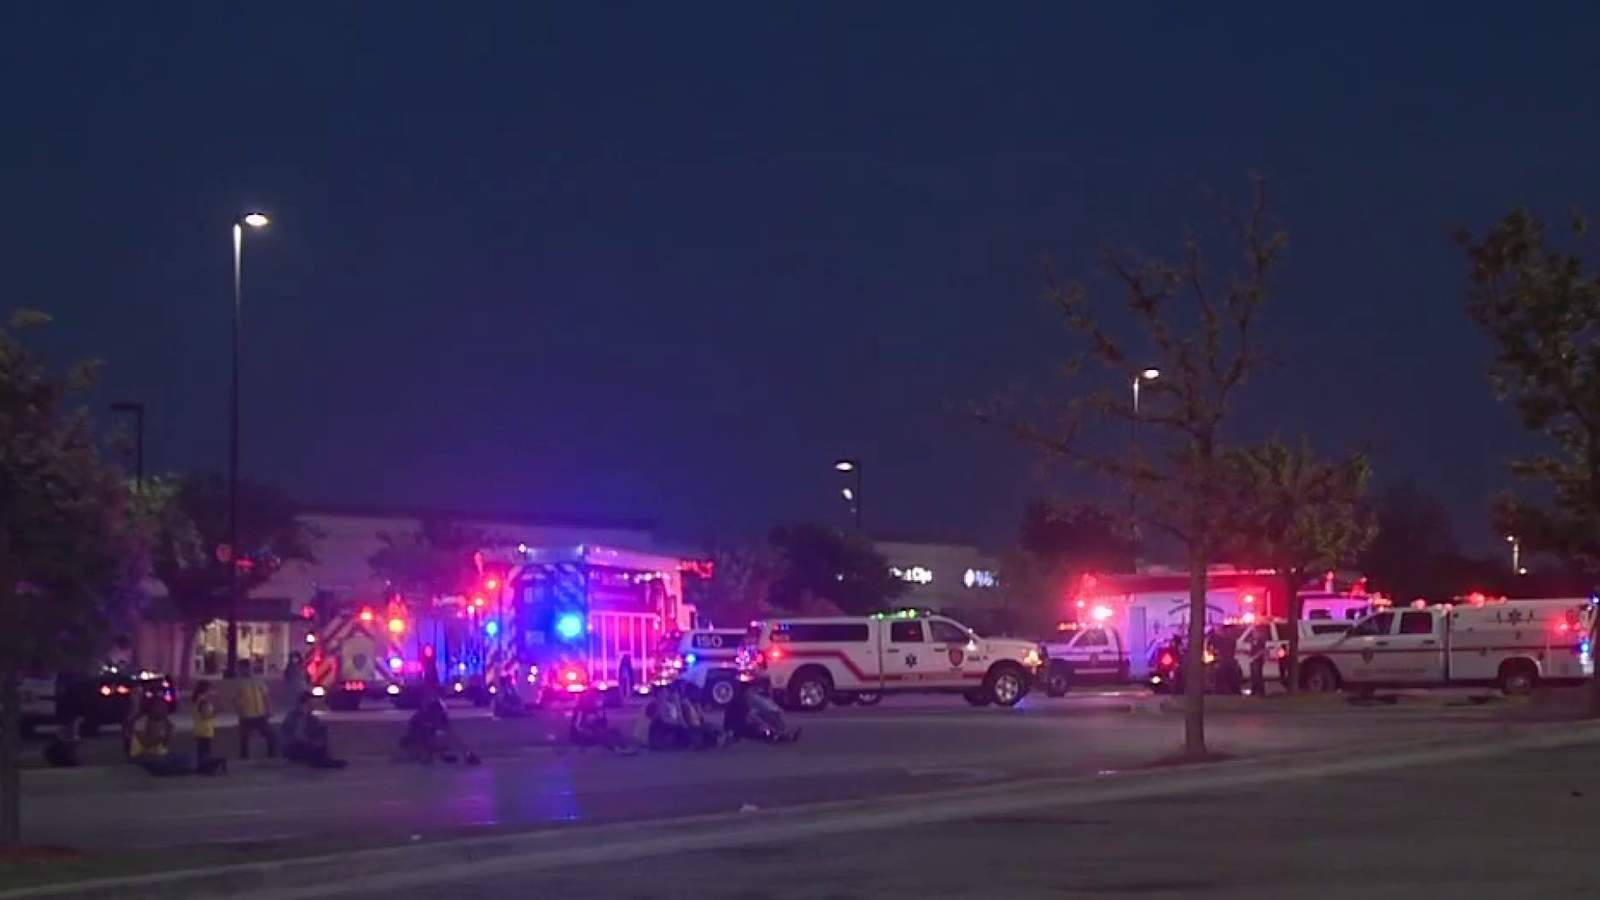 “Everything is clear” given in two separate Walmart stores following the bomb threats, police say